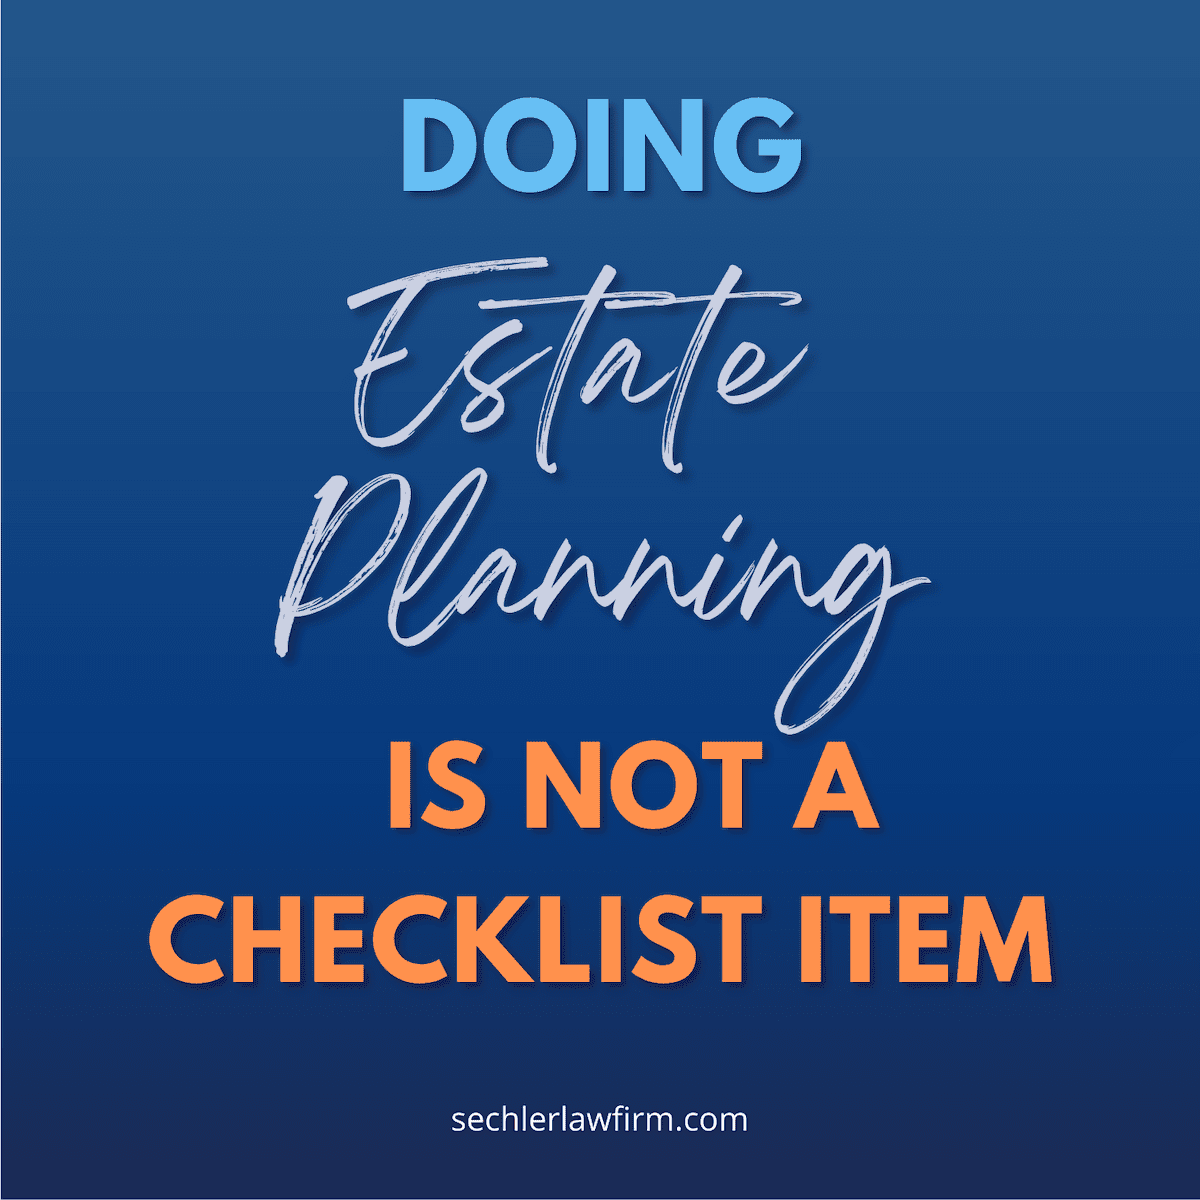 Doing Estate Planning is not a Checklist Item